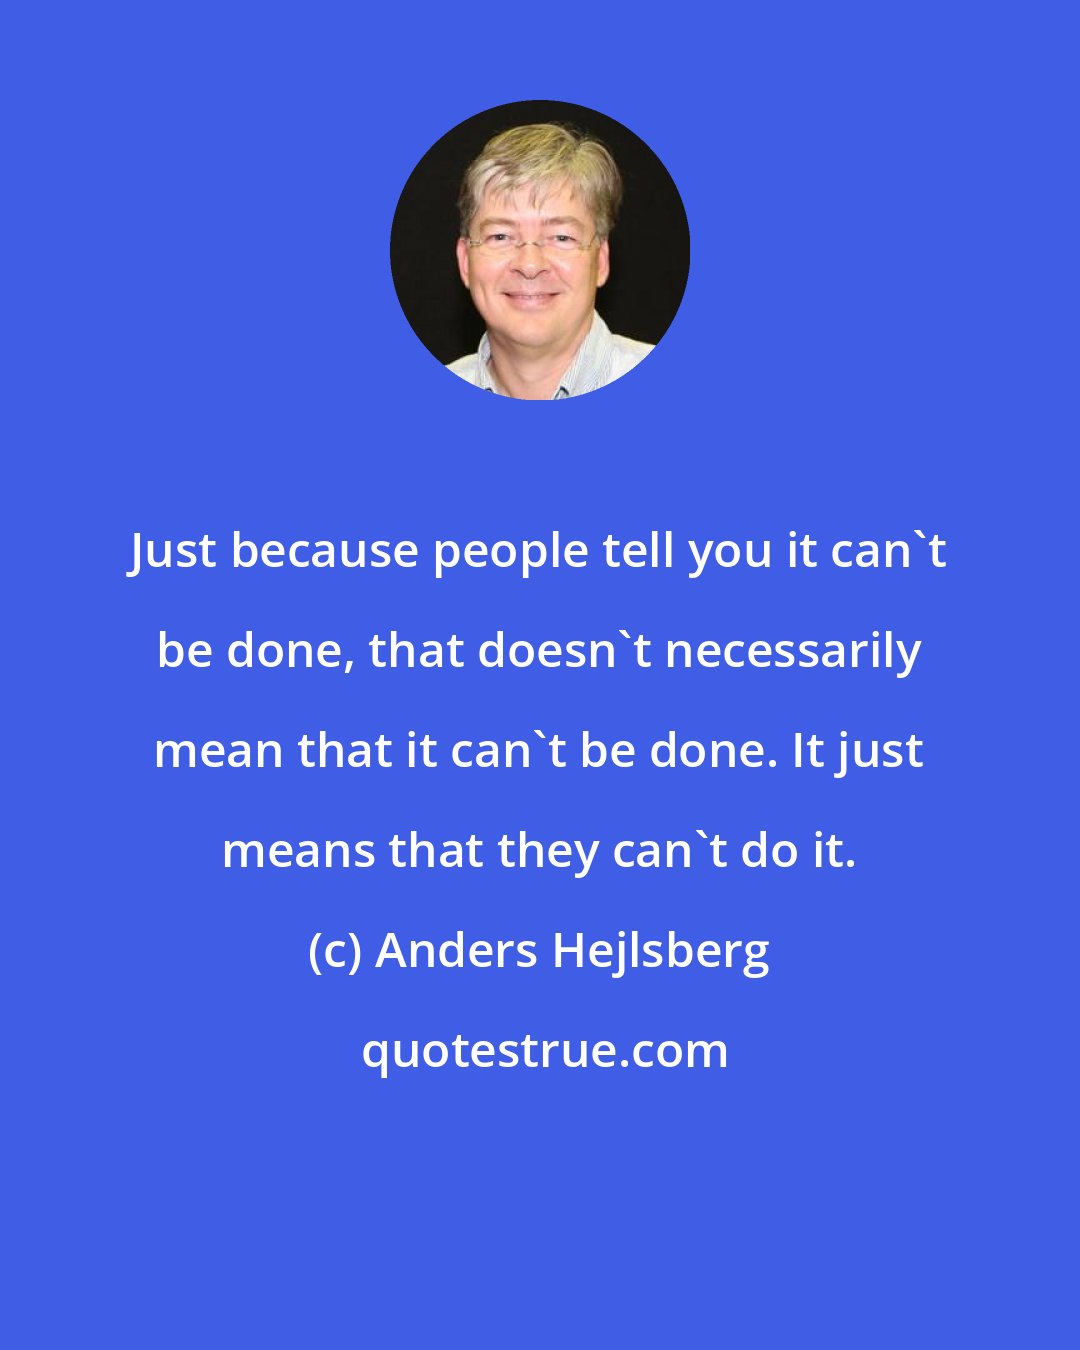 Anders Hejlsberg: Just because people tell you it can't be done, that doesn't necessarily mean that it can't be done. It just means that they can't do it.